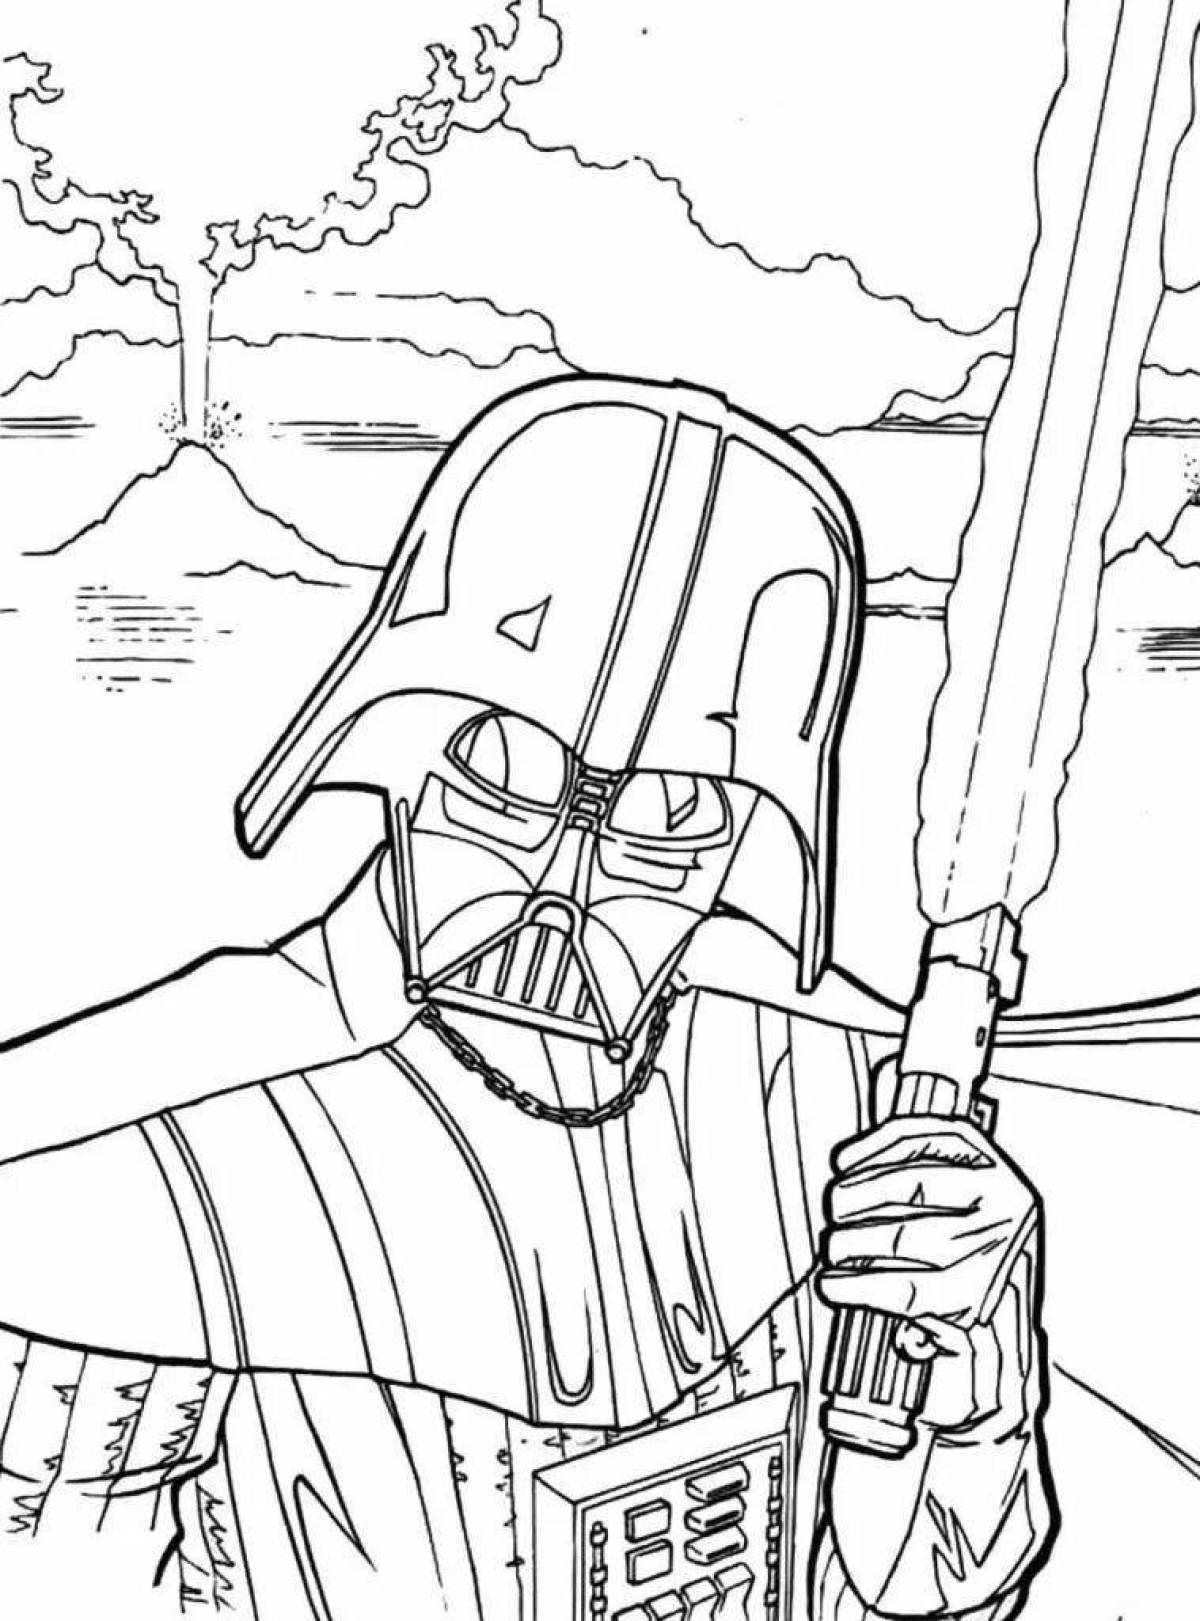 Star Wars spectacular coloring page